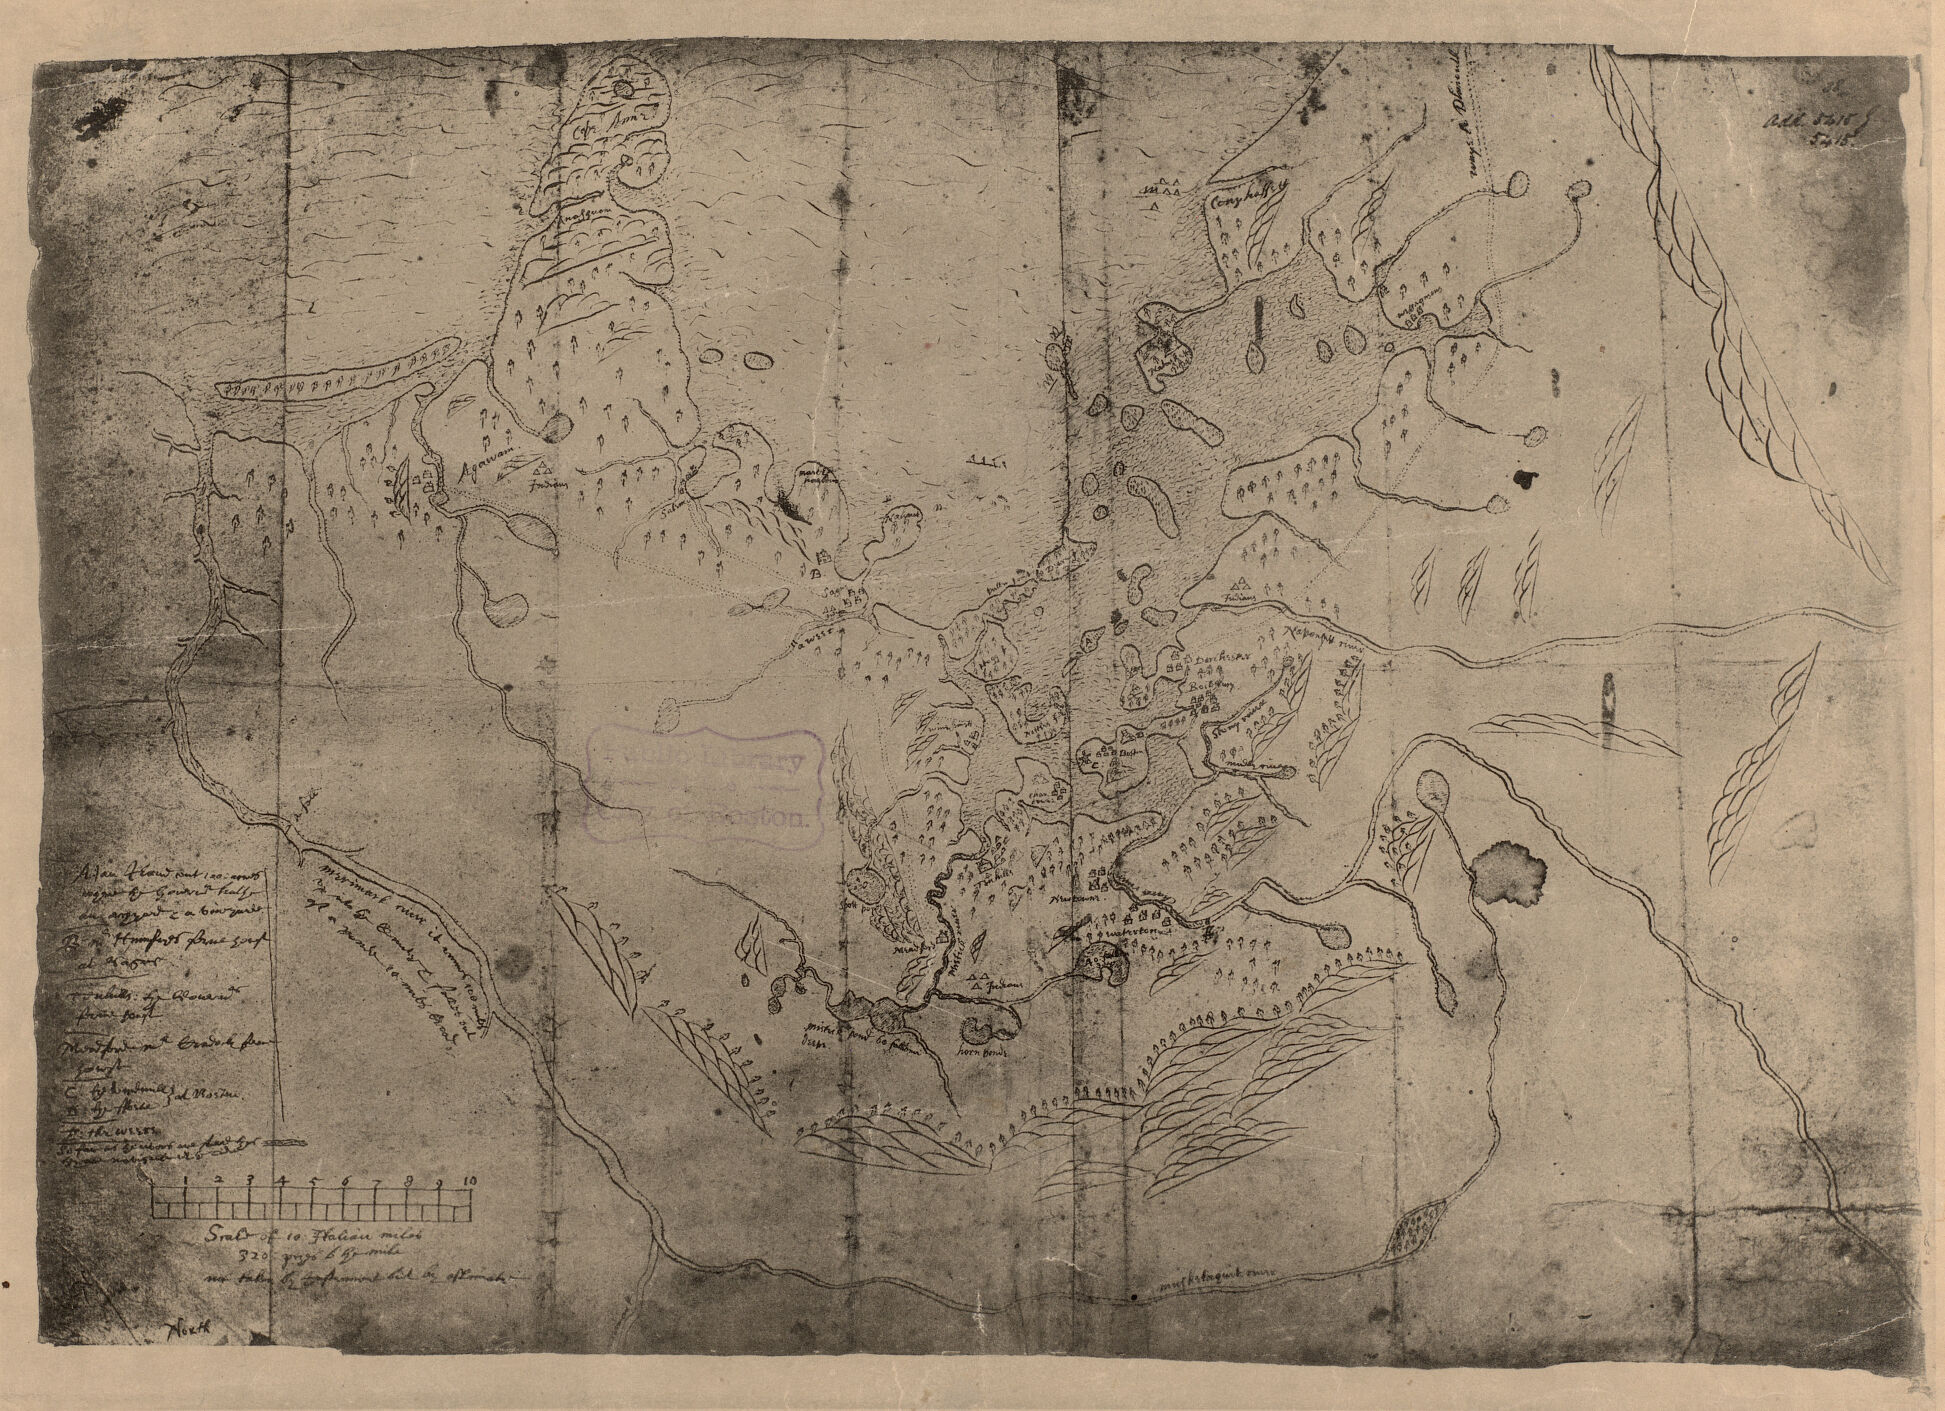 A facsimile copy from LMEC collections of John Winthrop&rsquo;s map of the Massachusetts bay.